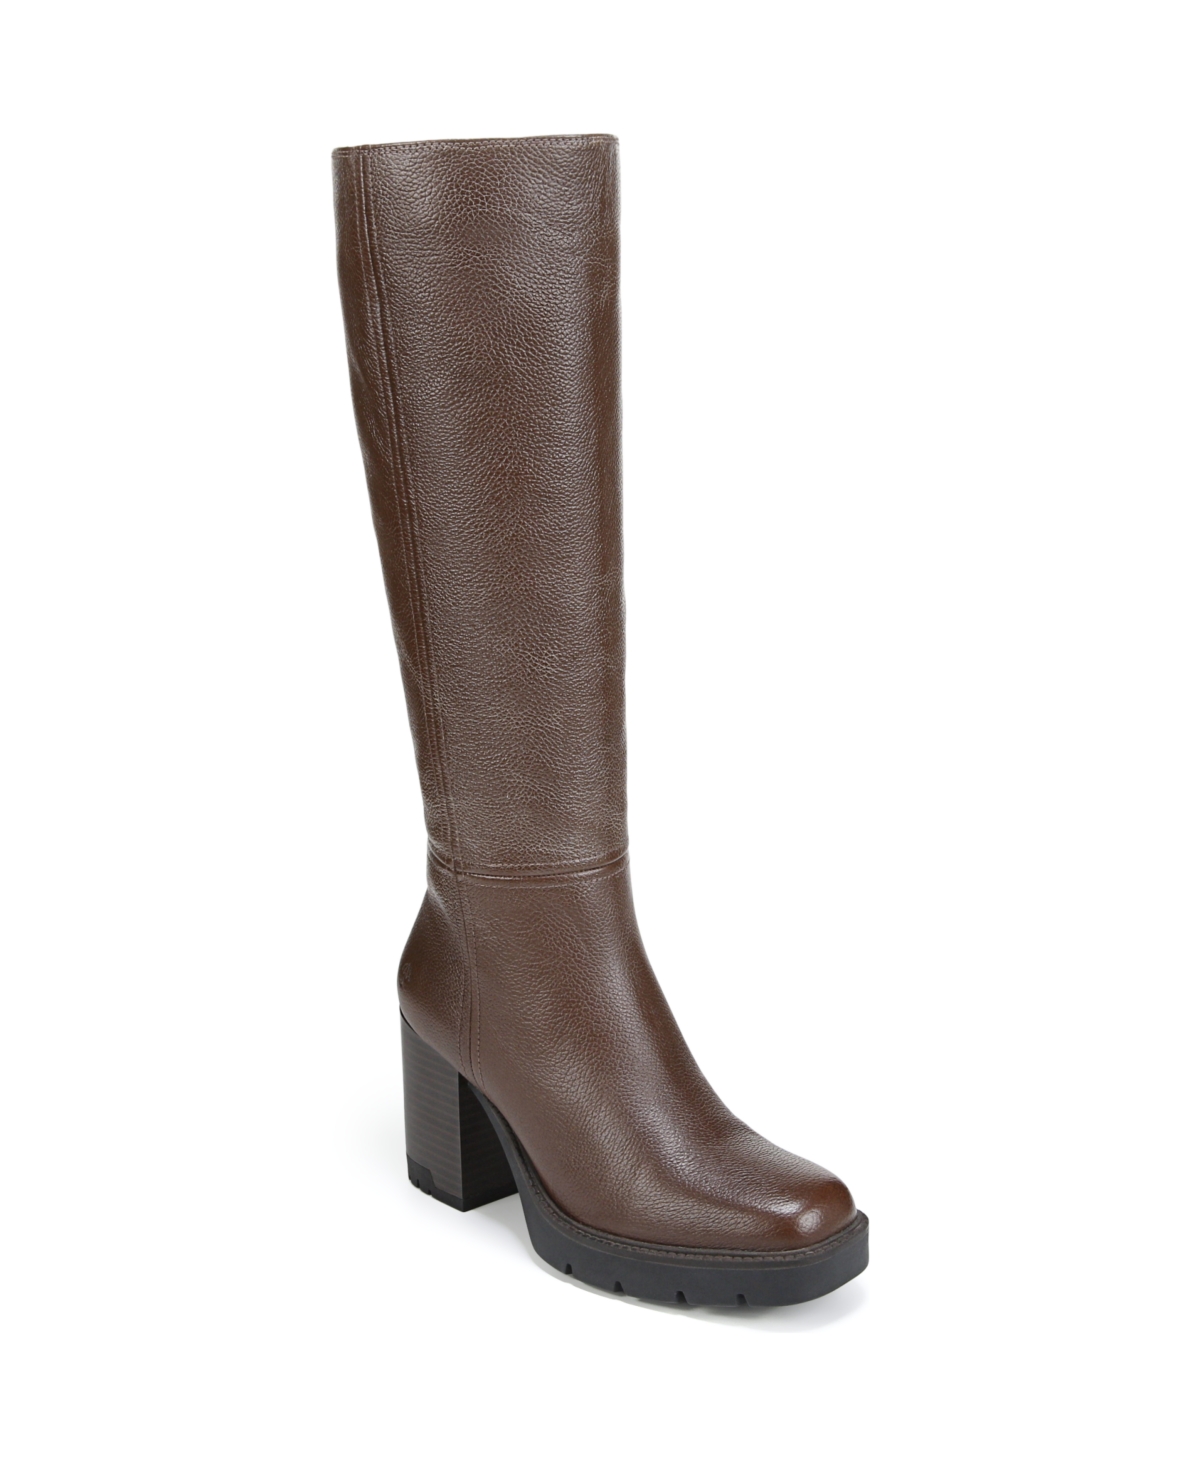 Naturalizer Willow Lug Sole Tall Boots In Chocolate Brown Leather